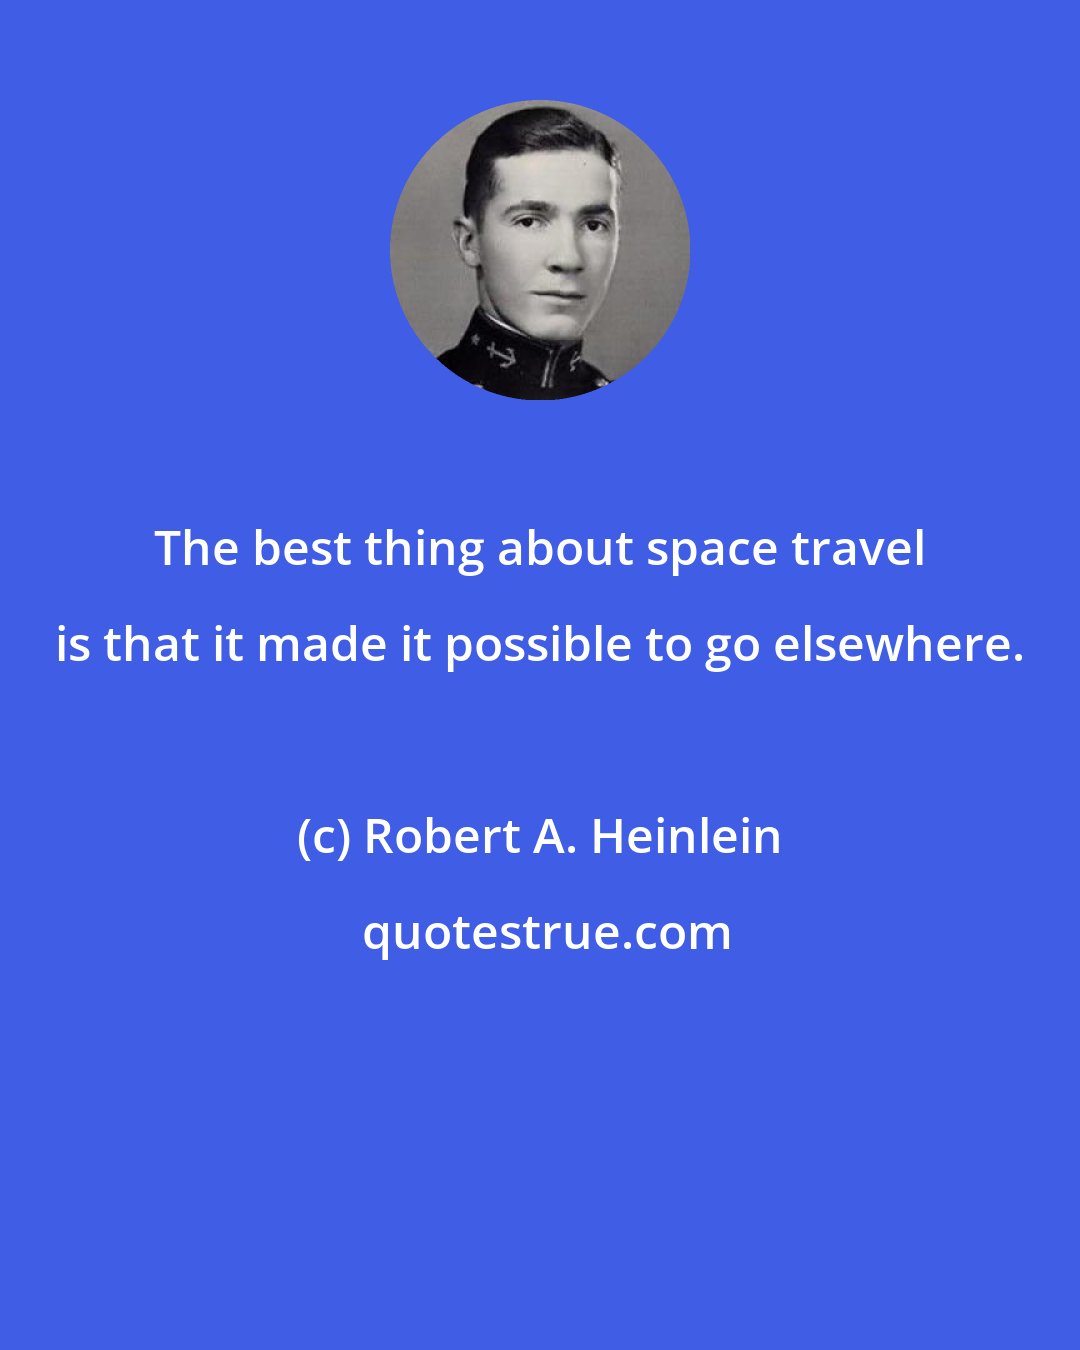 Robert A. Heinlein: The best thing about space travel is that it made it possible to go elsewhere.